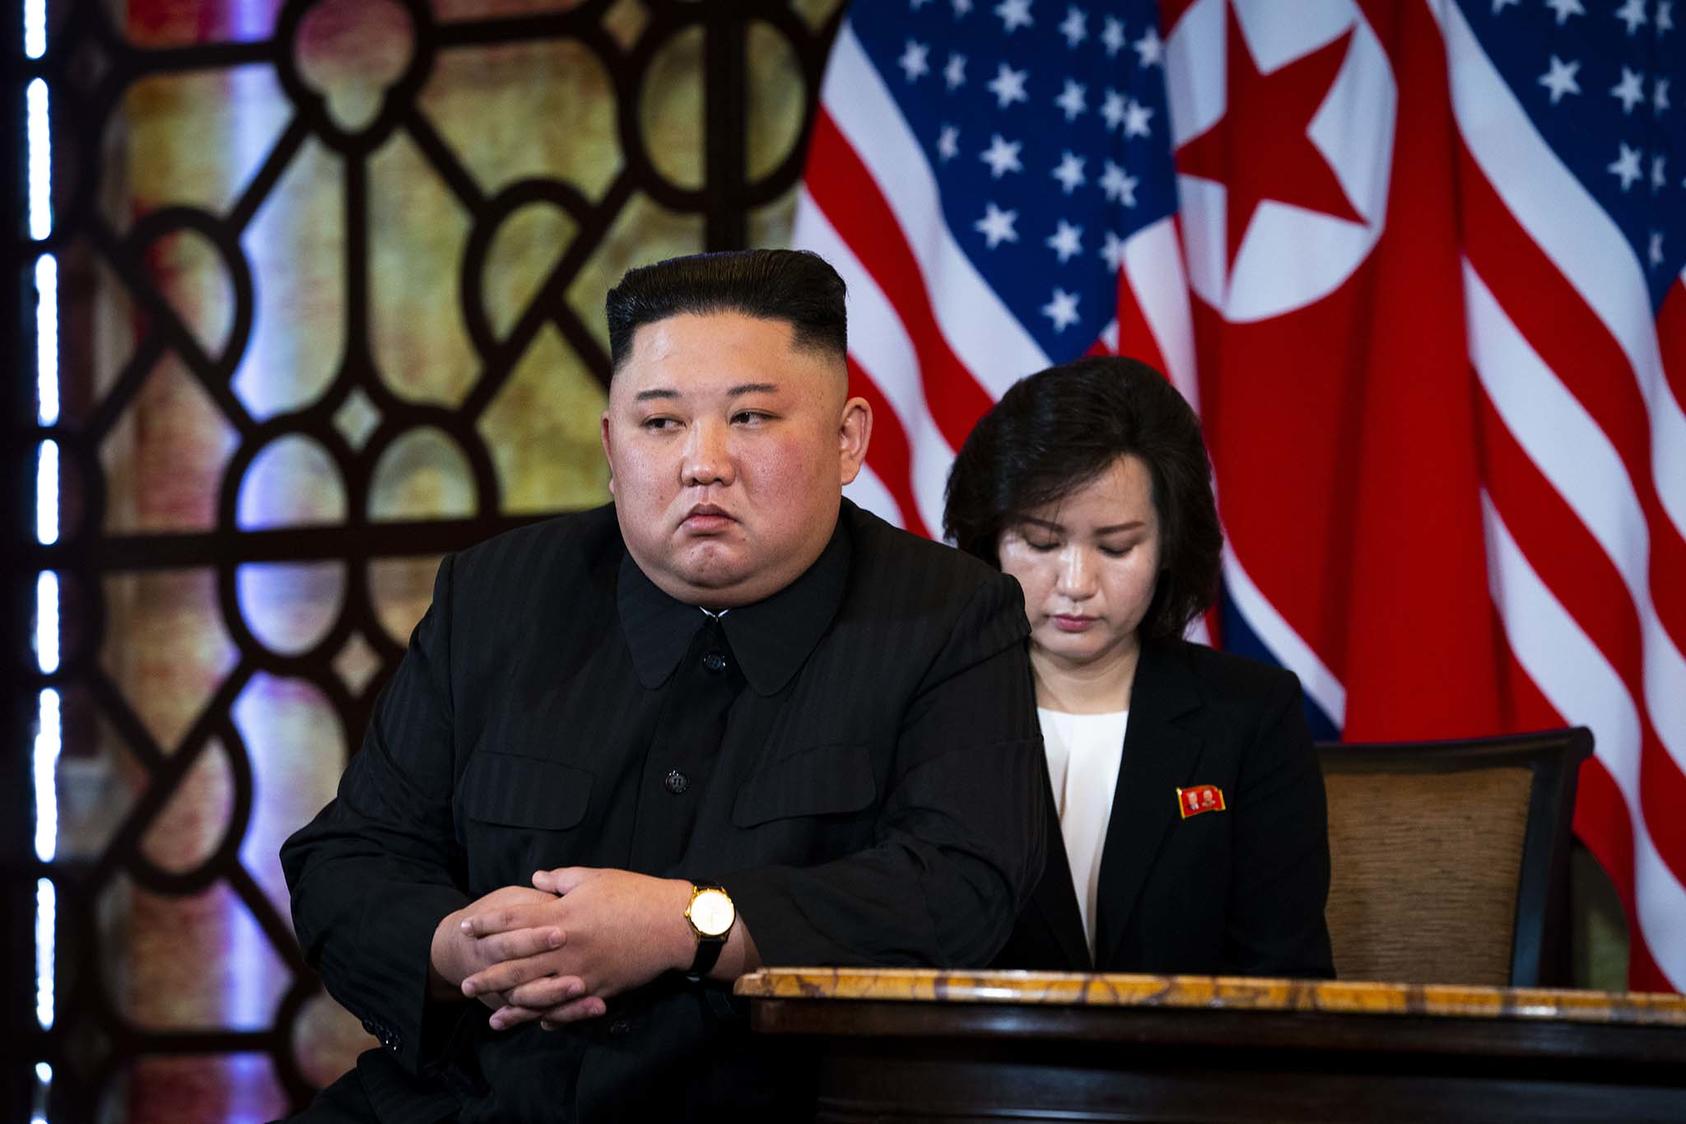 North Korean leader Kim Jong-un sits opposite President Donald Trump at their 2019 meeting in Hanoi. As the Biden administration prepared to take office, Kim vowed to increase North Korea’s nuclear weapons capabilities. (Doug Mills/The New York Times)